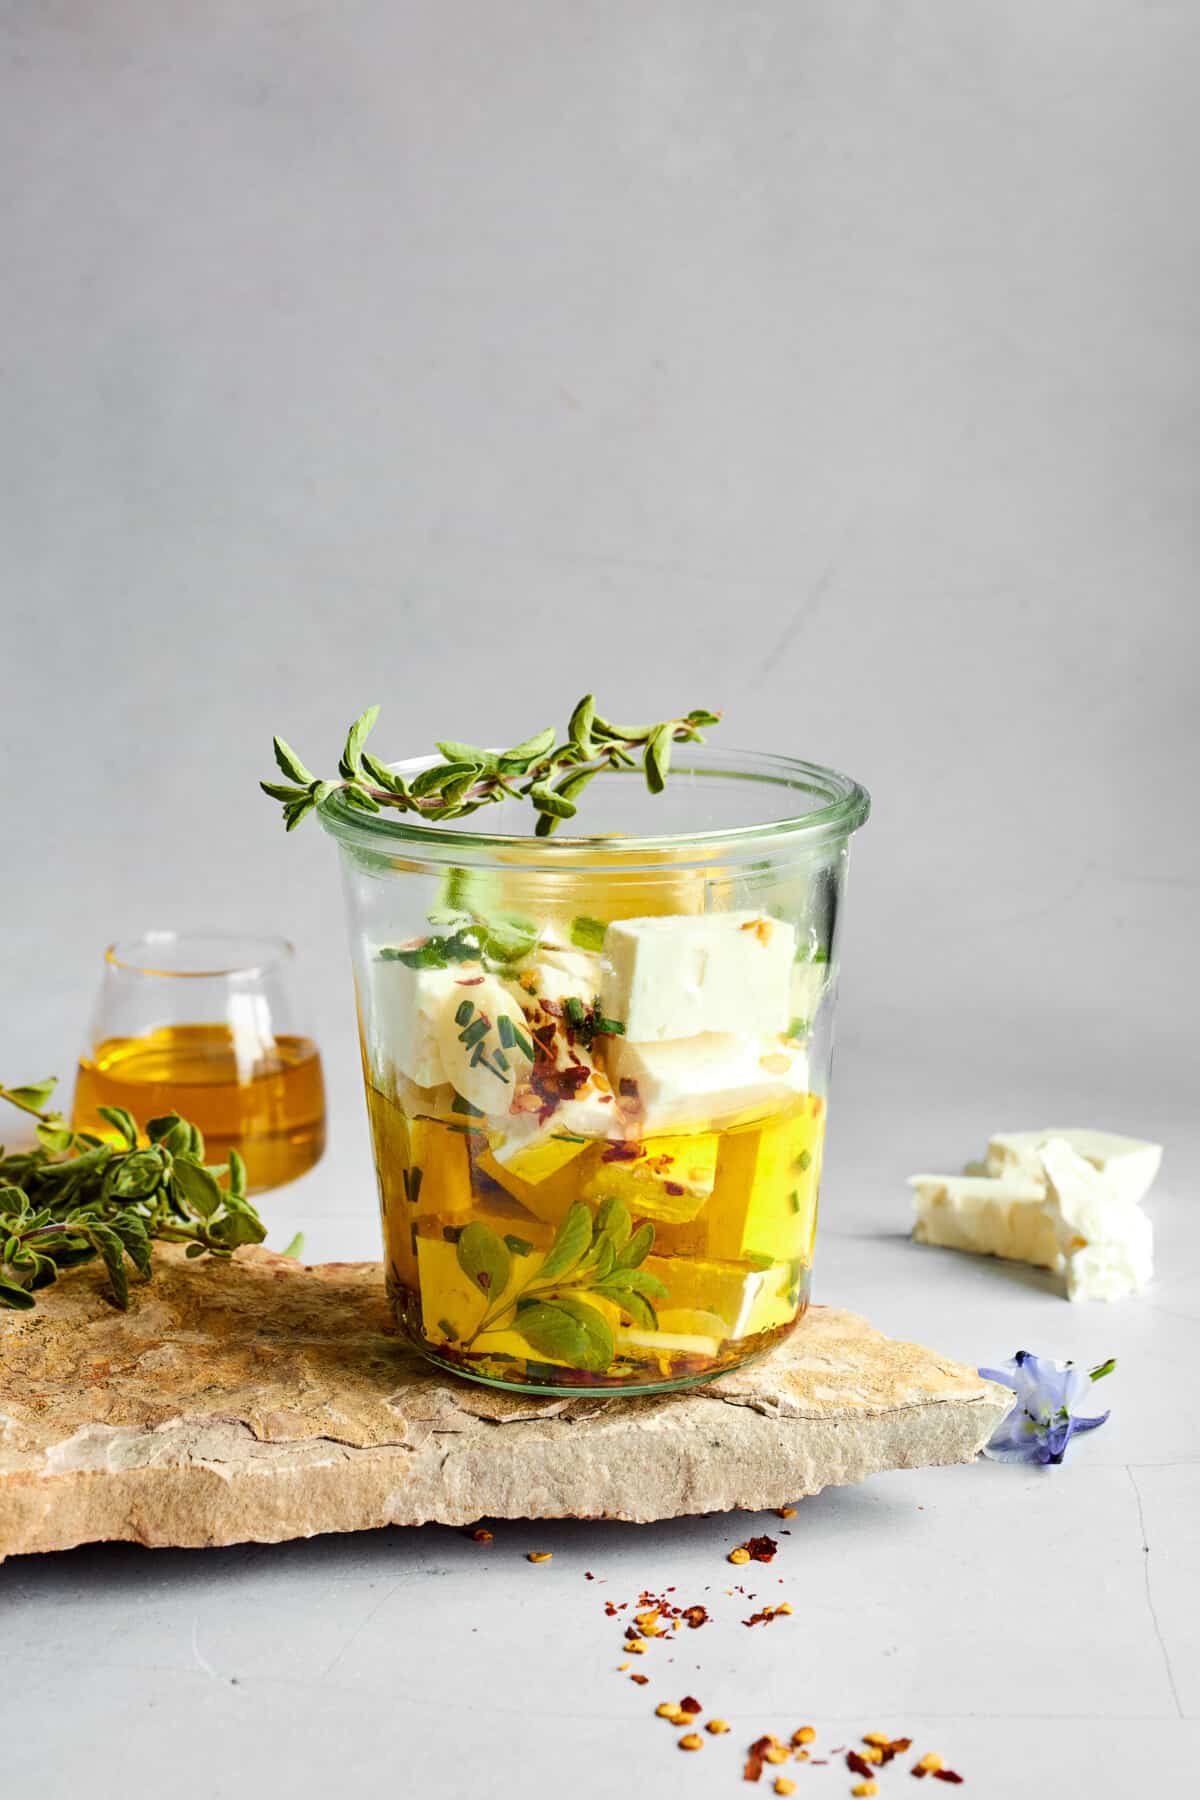 Feta cubes being soaked in an olive oil marinade. 